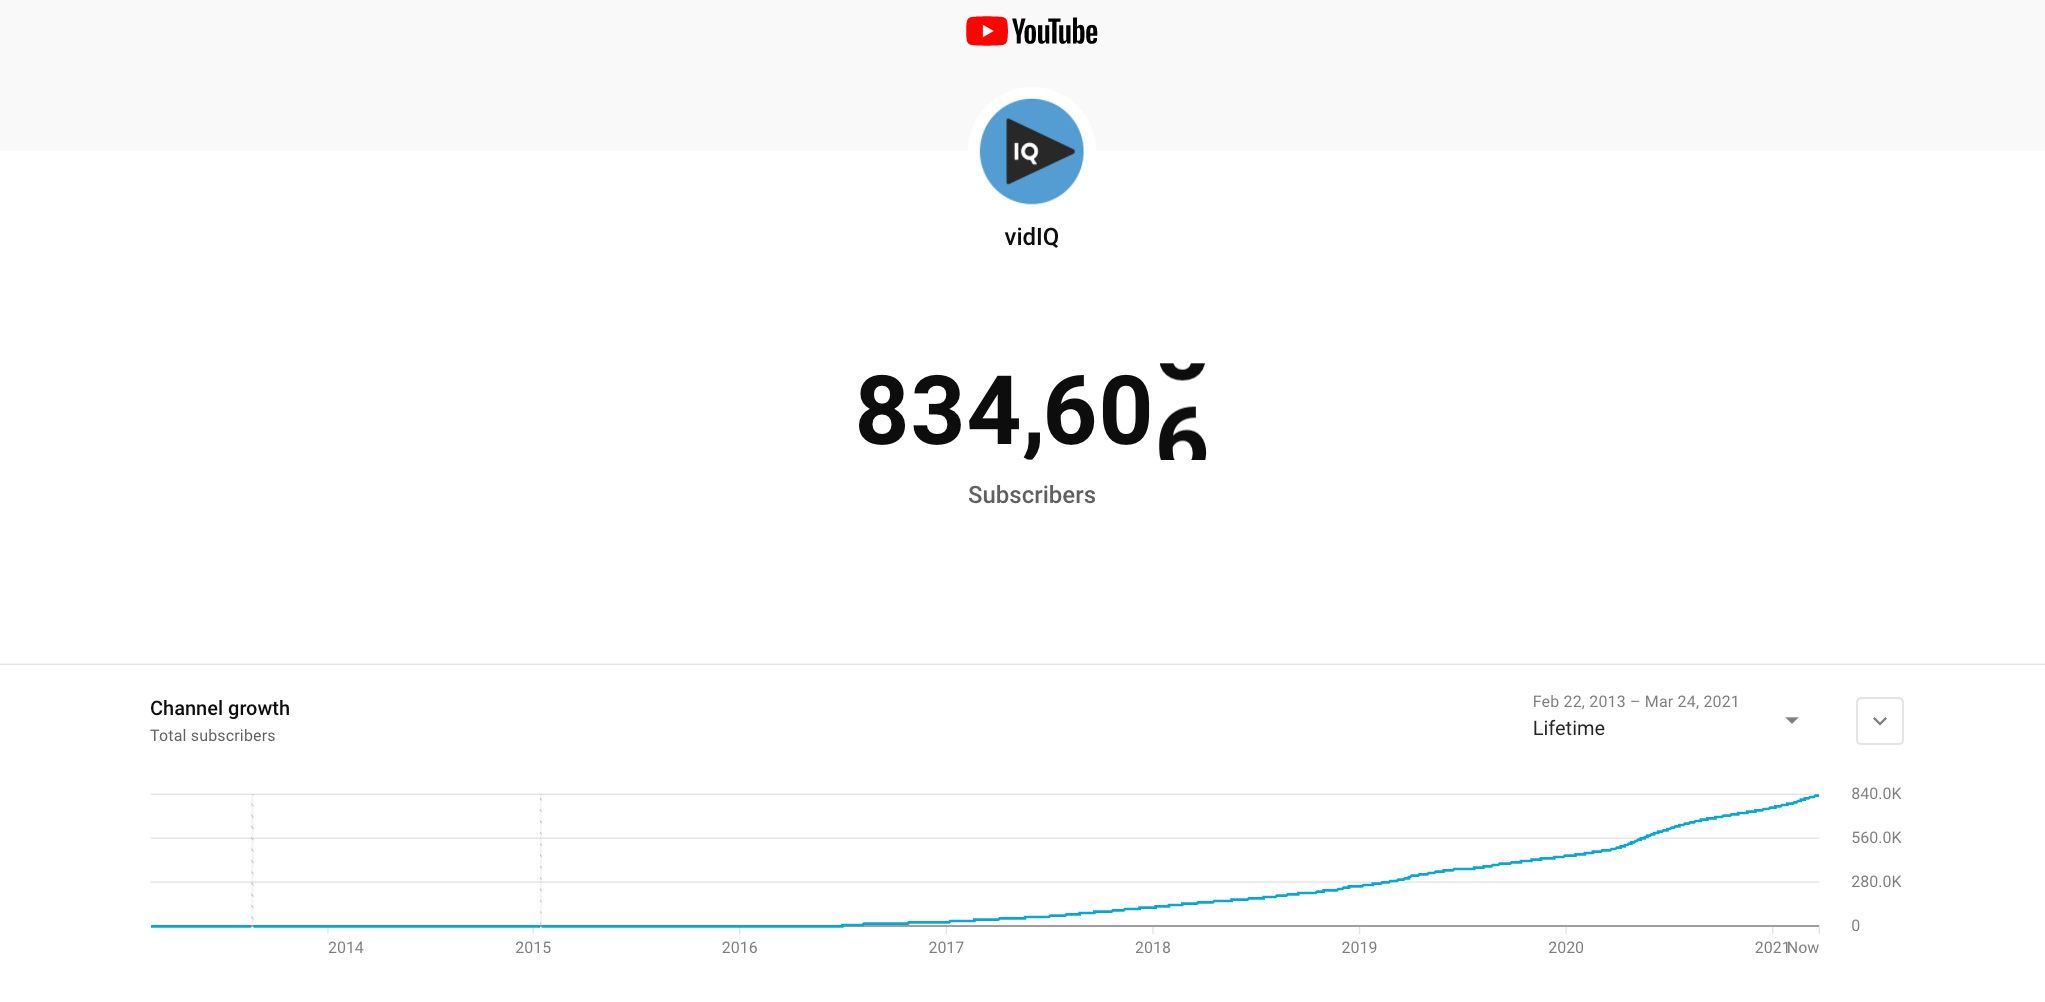 How to make my own live  subscriber count - Quora